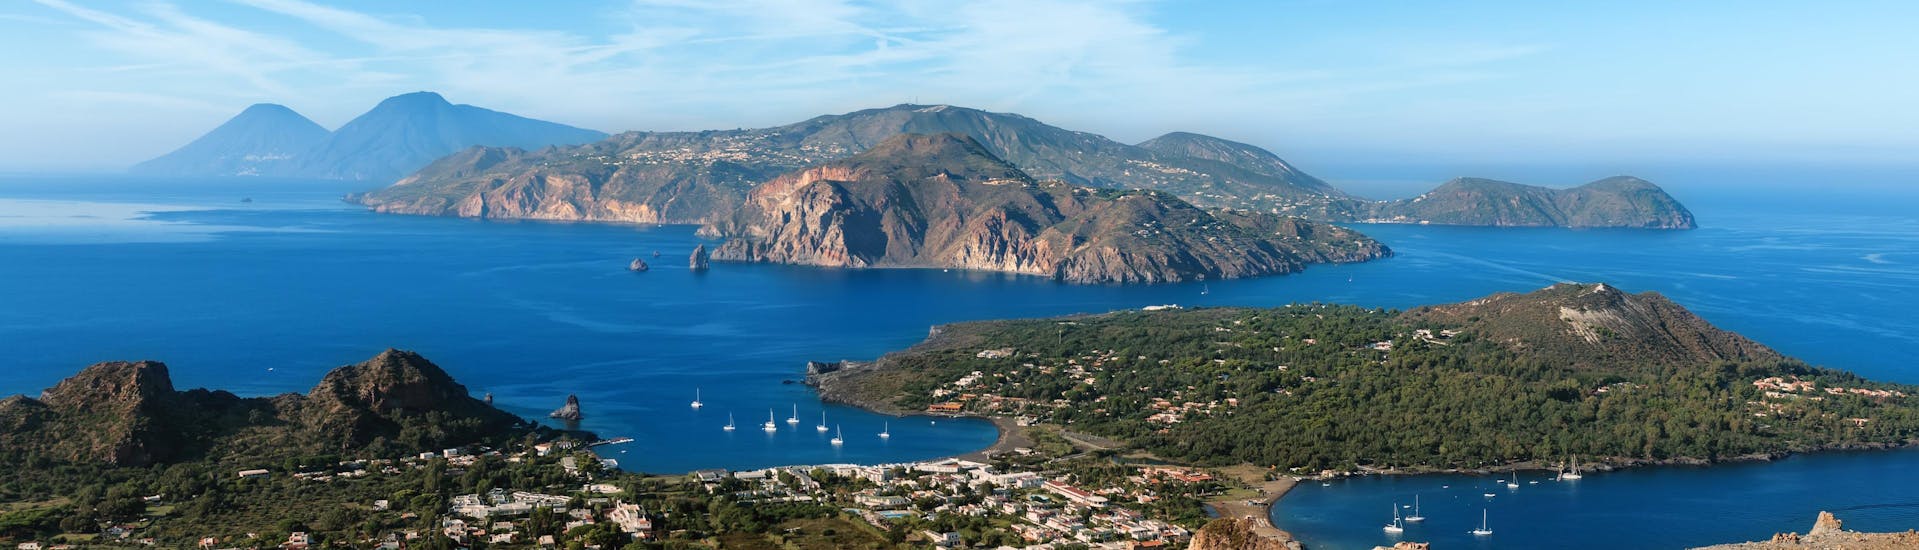 The majestic volcanoes that one can see on a boat trip to the aeolian islands.